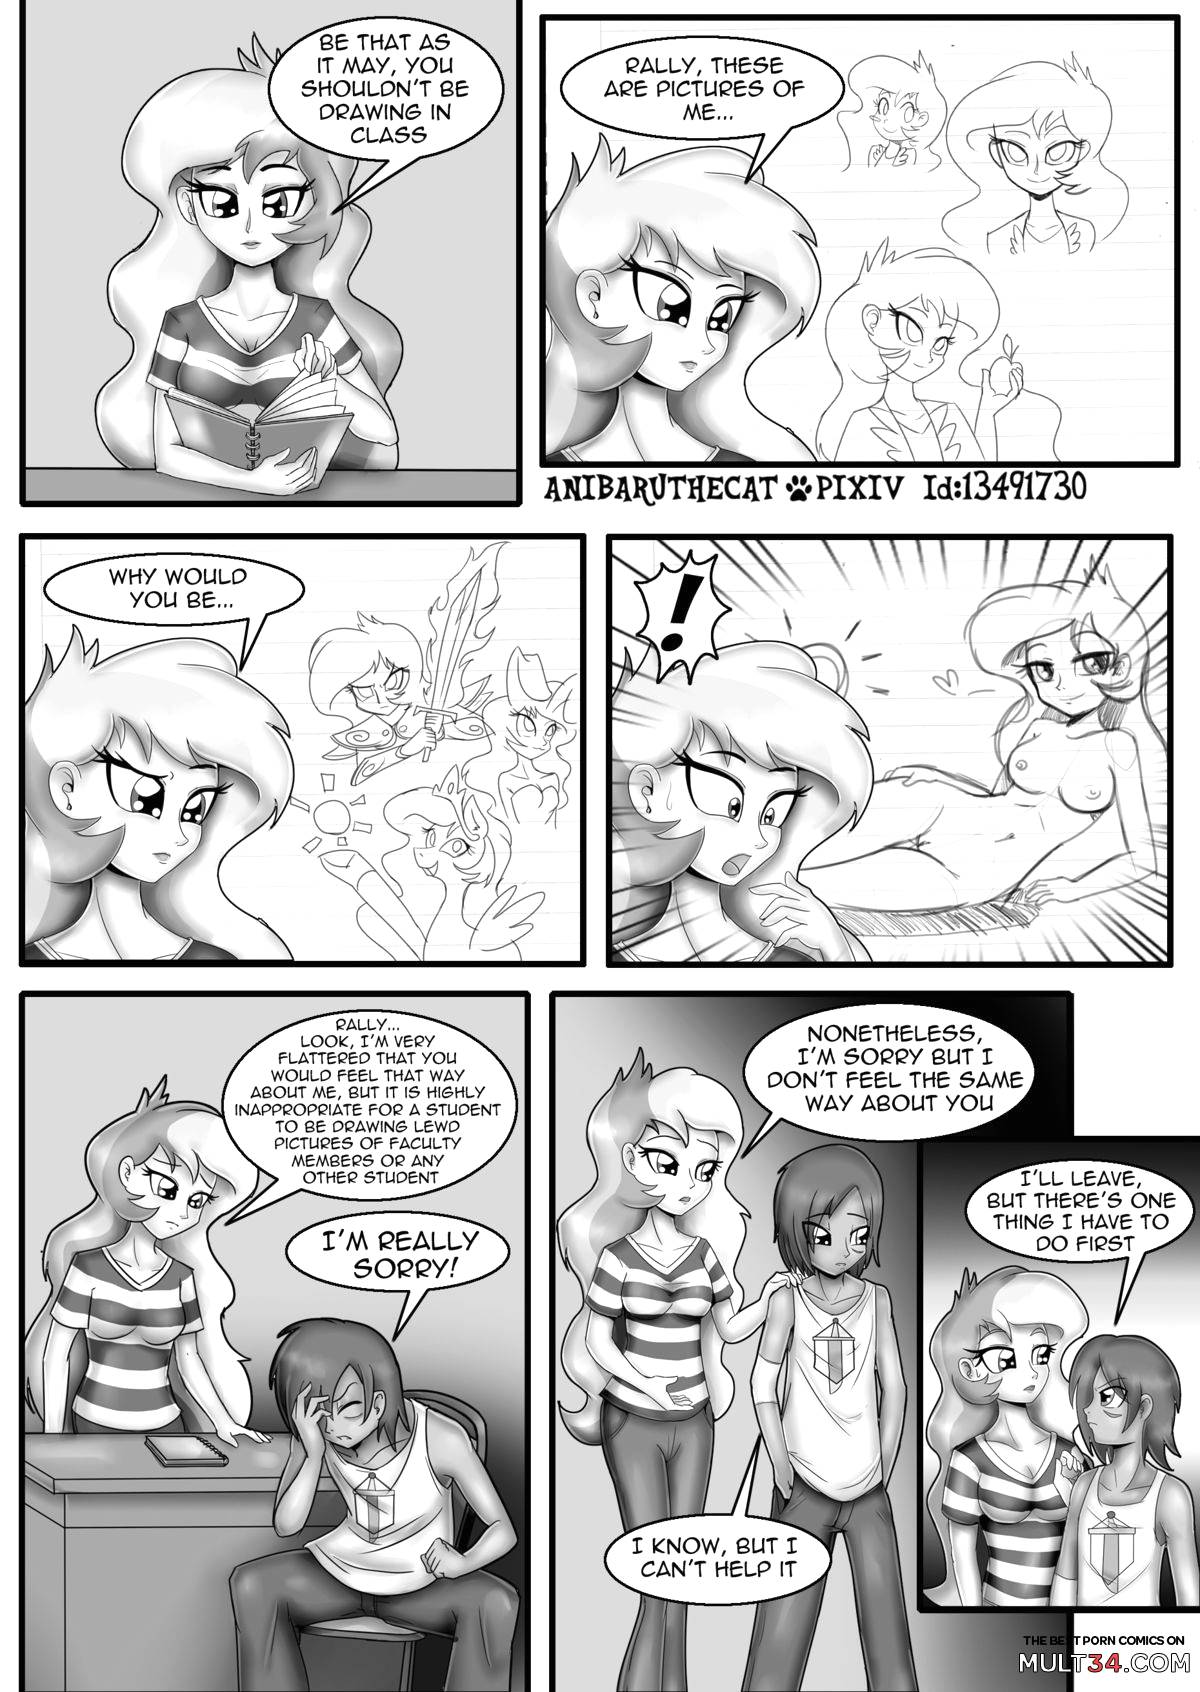 Boys will be Boys page 4